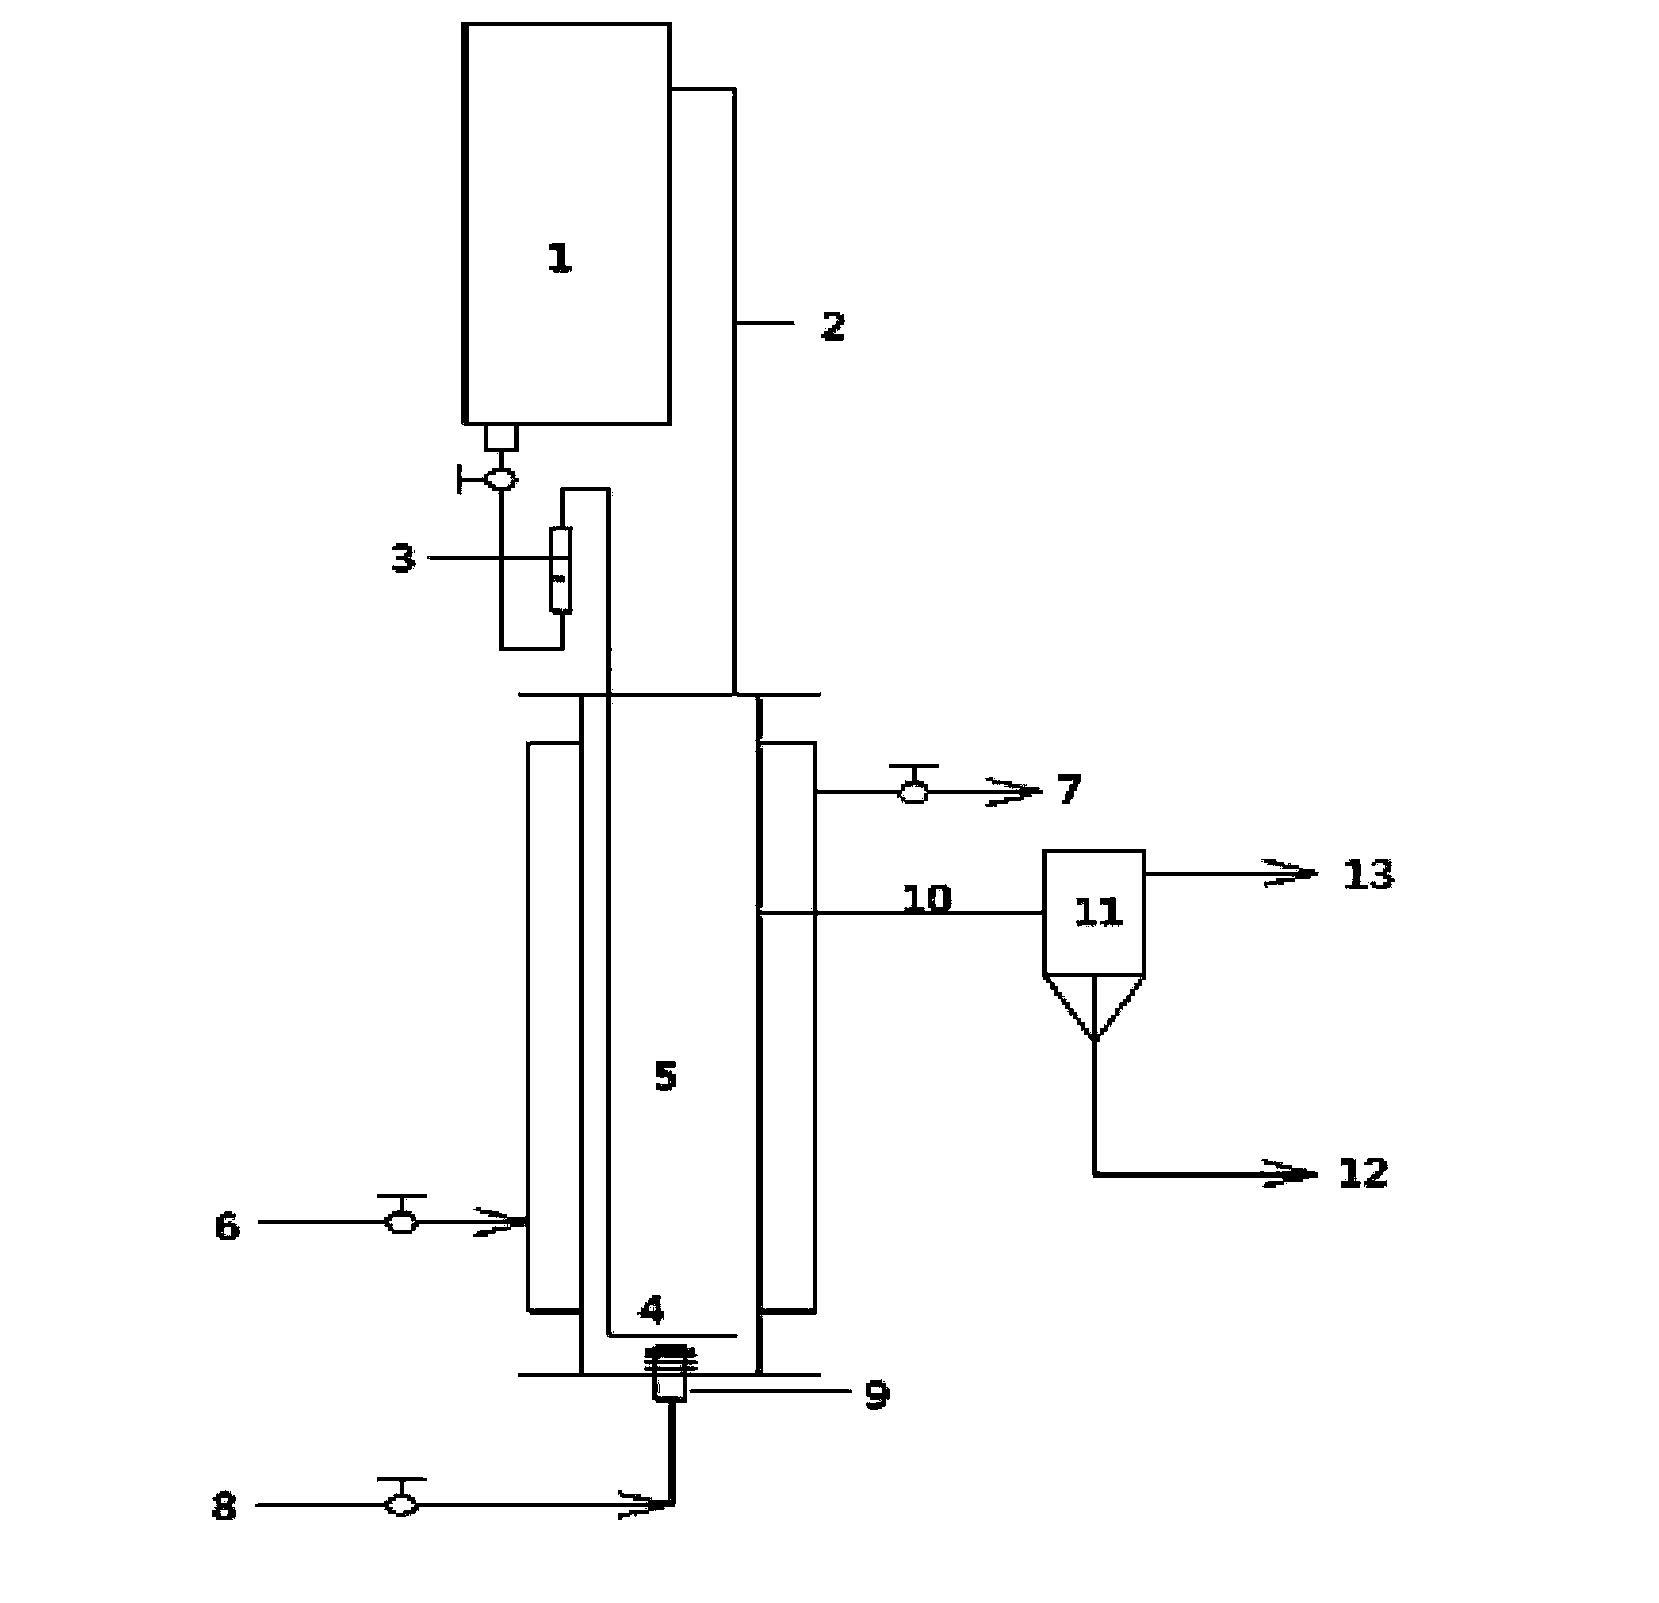 Continuous synthesis process of alpha-chloro-alpha-acetyl-gamma-butyrolactone